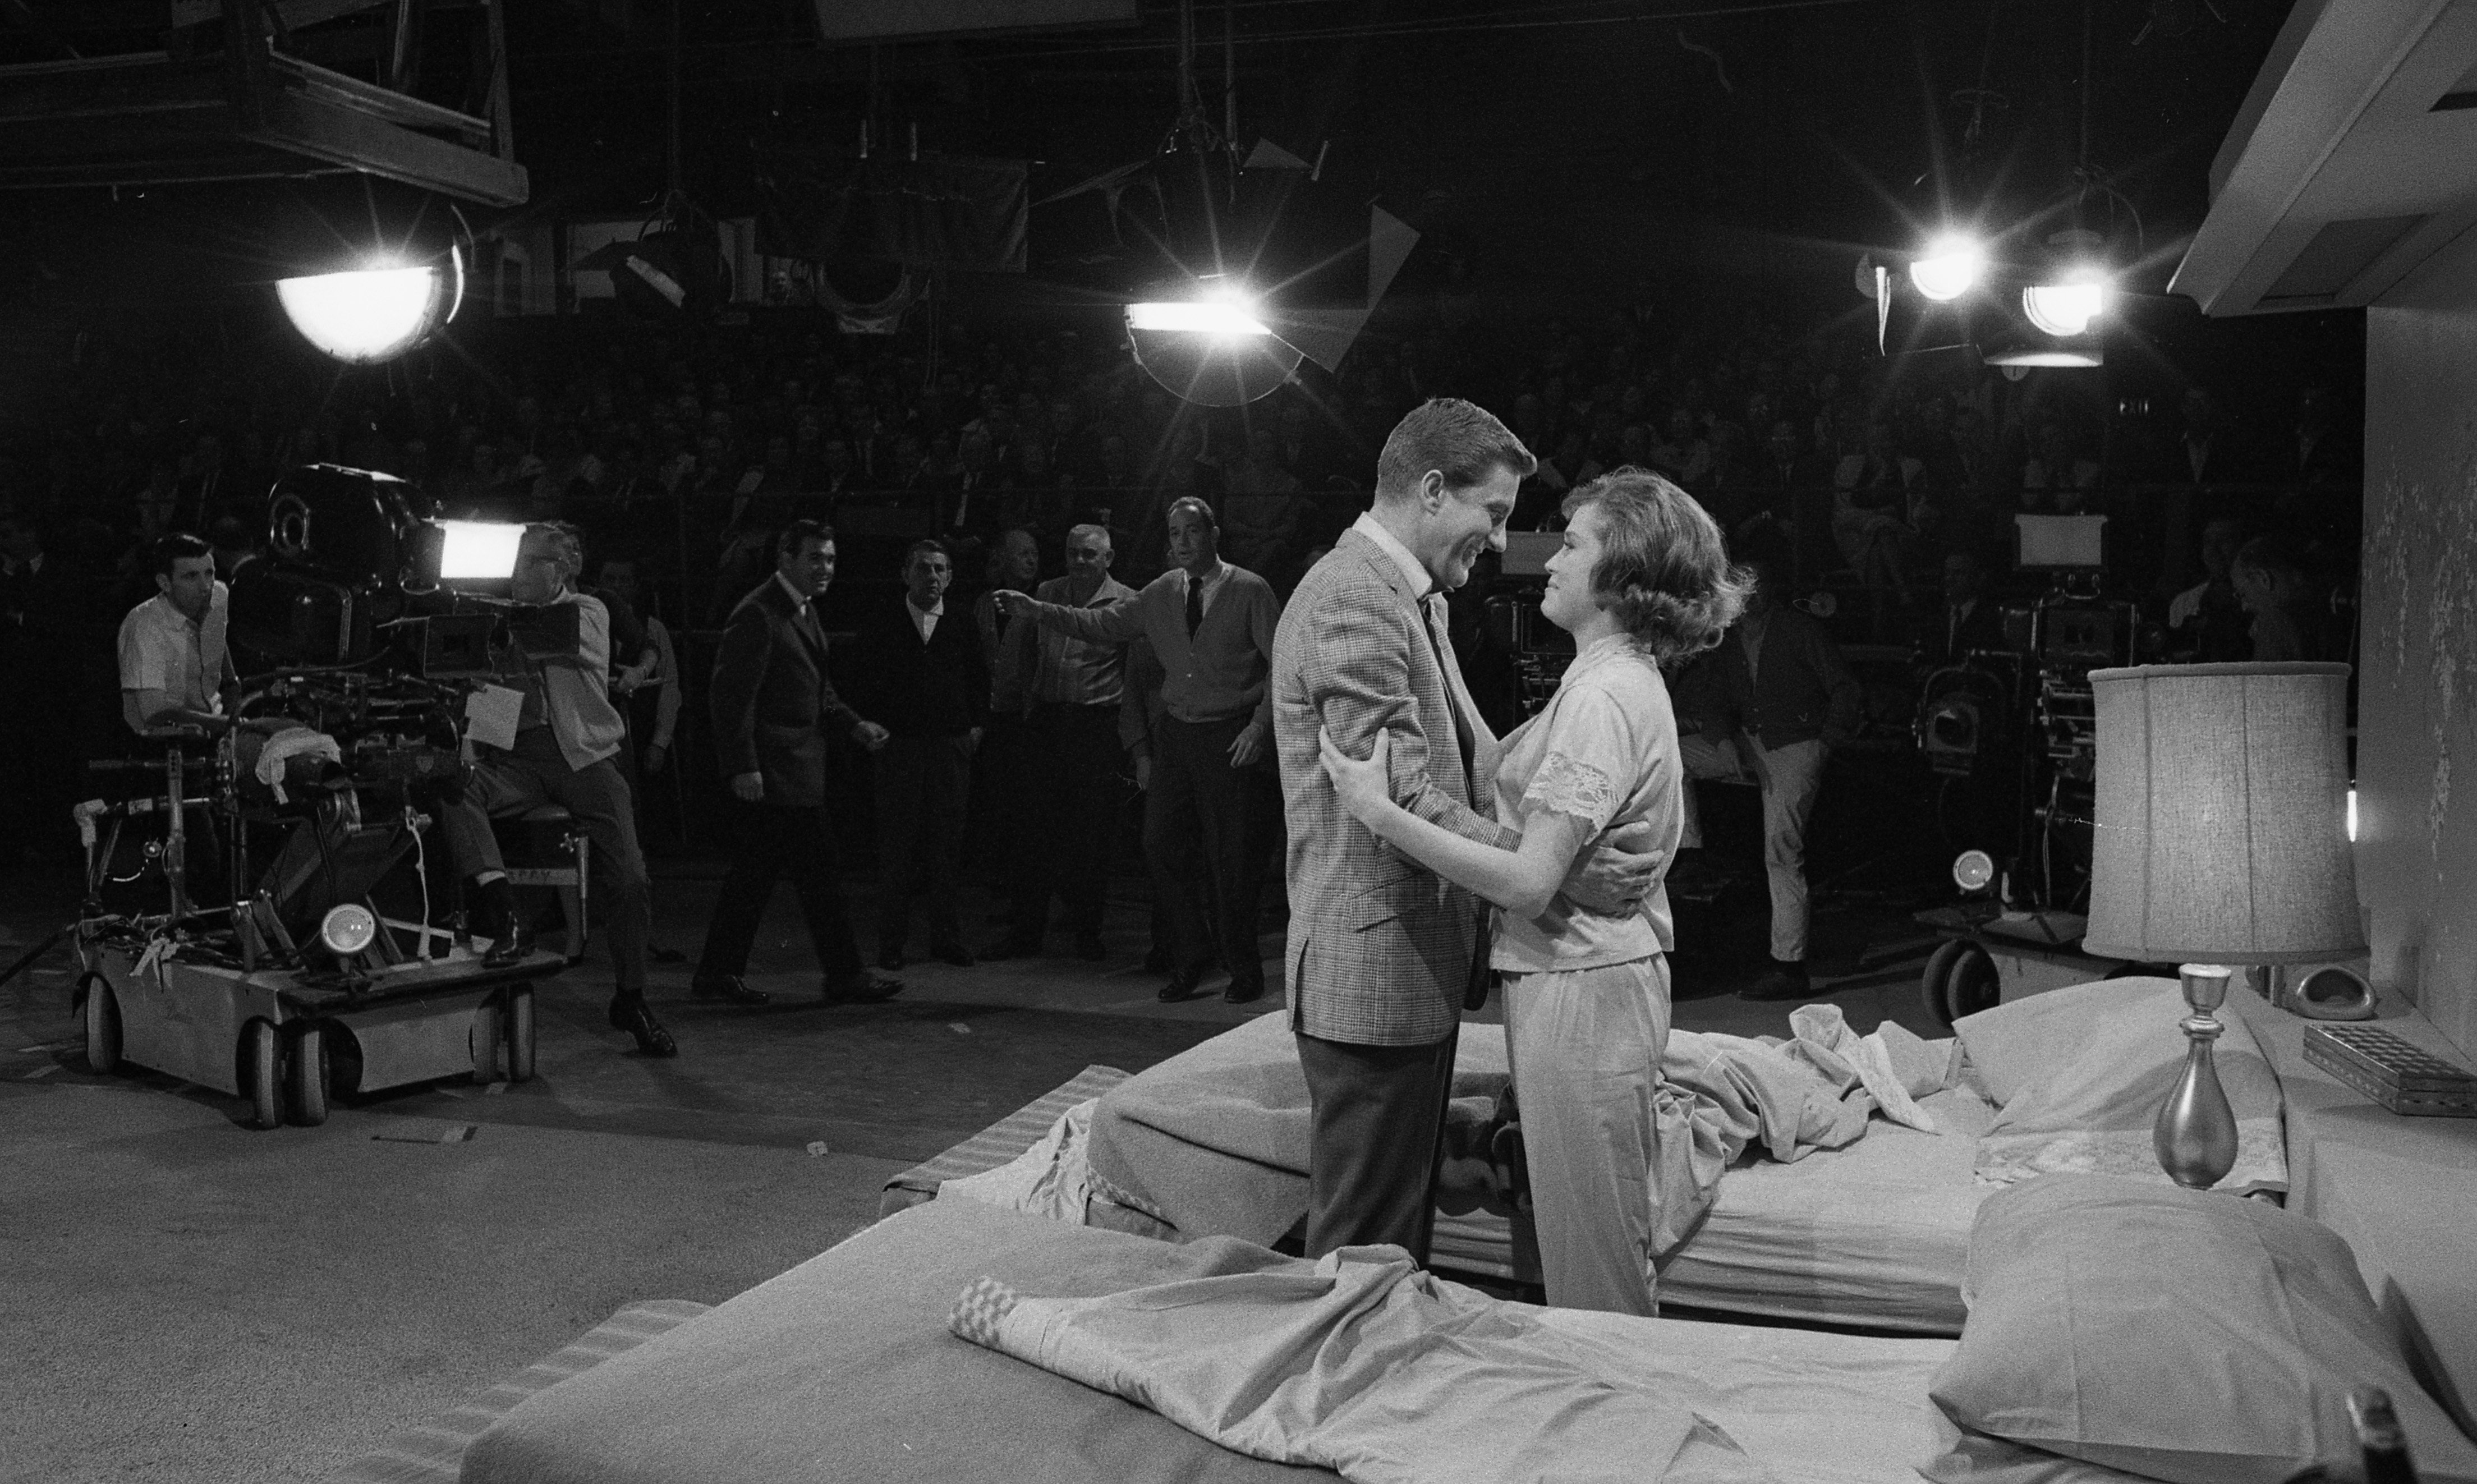 'The Dick Van Dyke Show' co-stars Dick Van Dyke, left, and Mary Tyler Moore in a scene from the classic comedy.